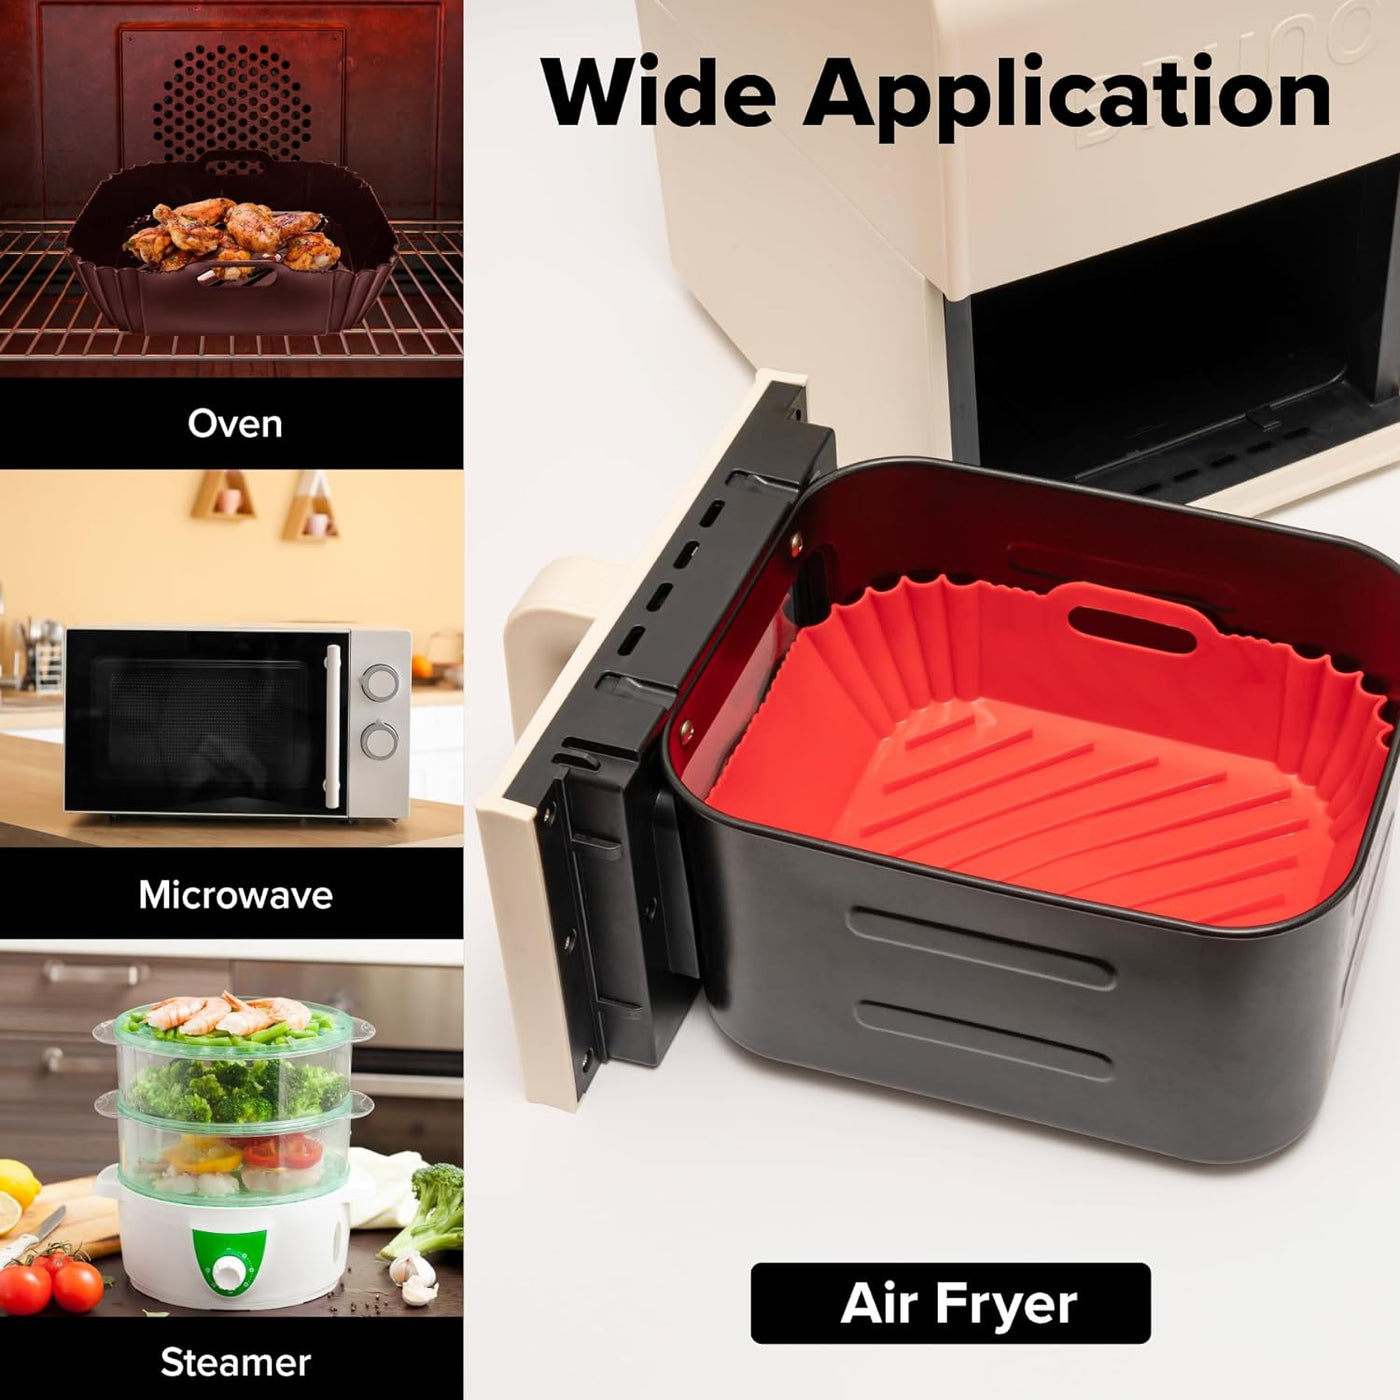 Powerlix 2 Pack 8.5'' Air Fryer Silicone Pot, Food Safe Non Stick Sili